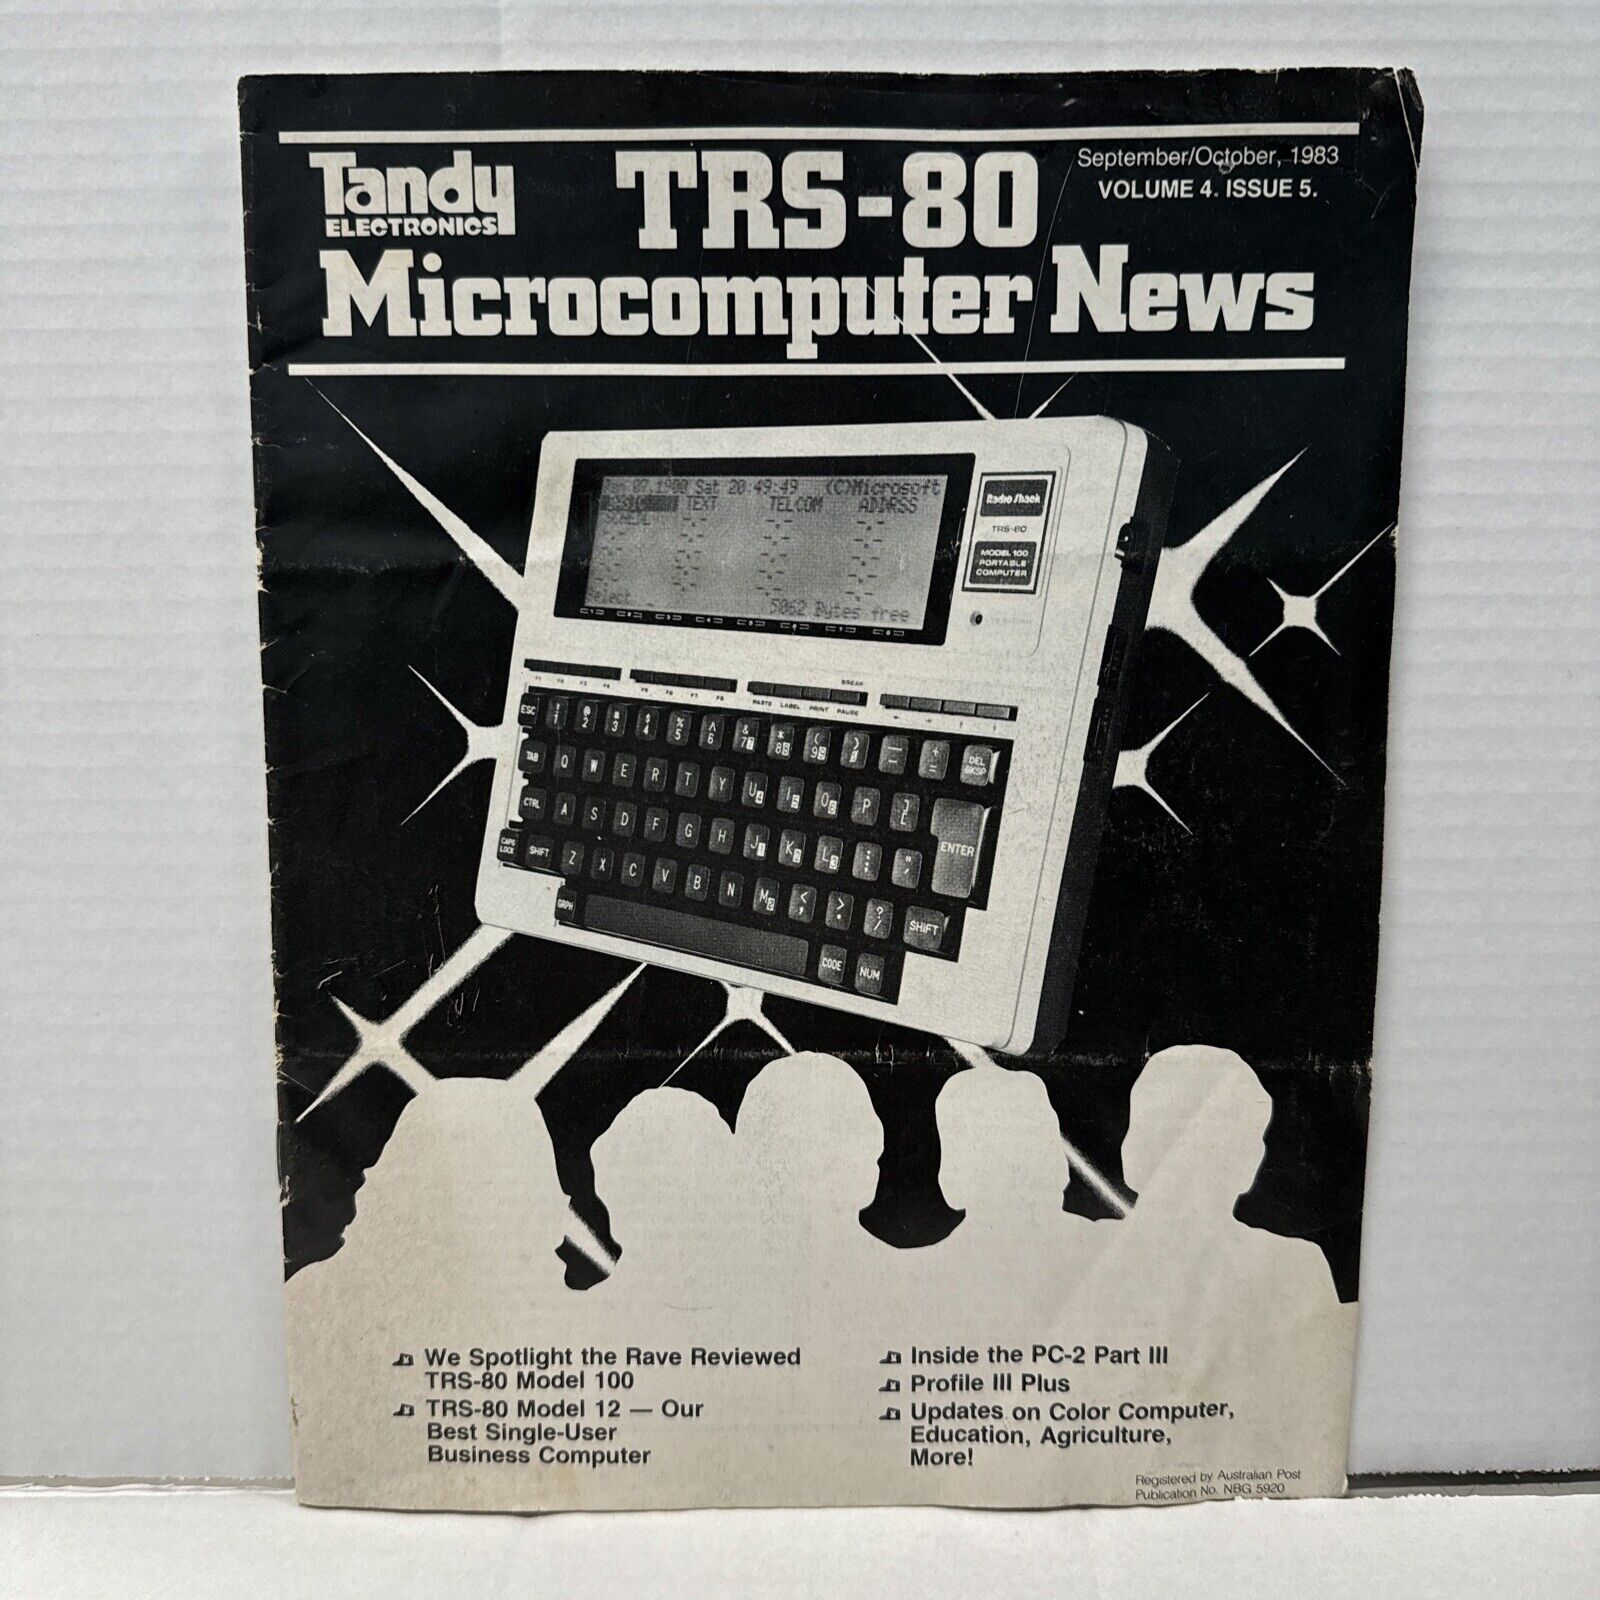 Tandy TRS-80 Microcomputer News September/October 1983 Vol 4 Issue 5 Model 100